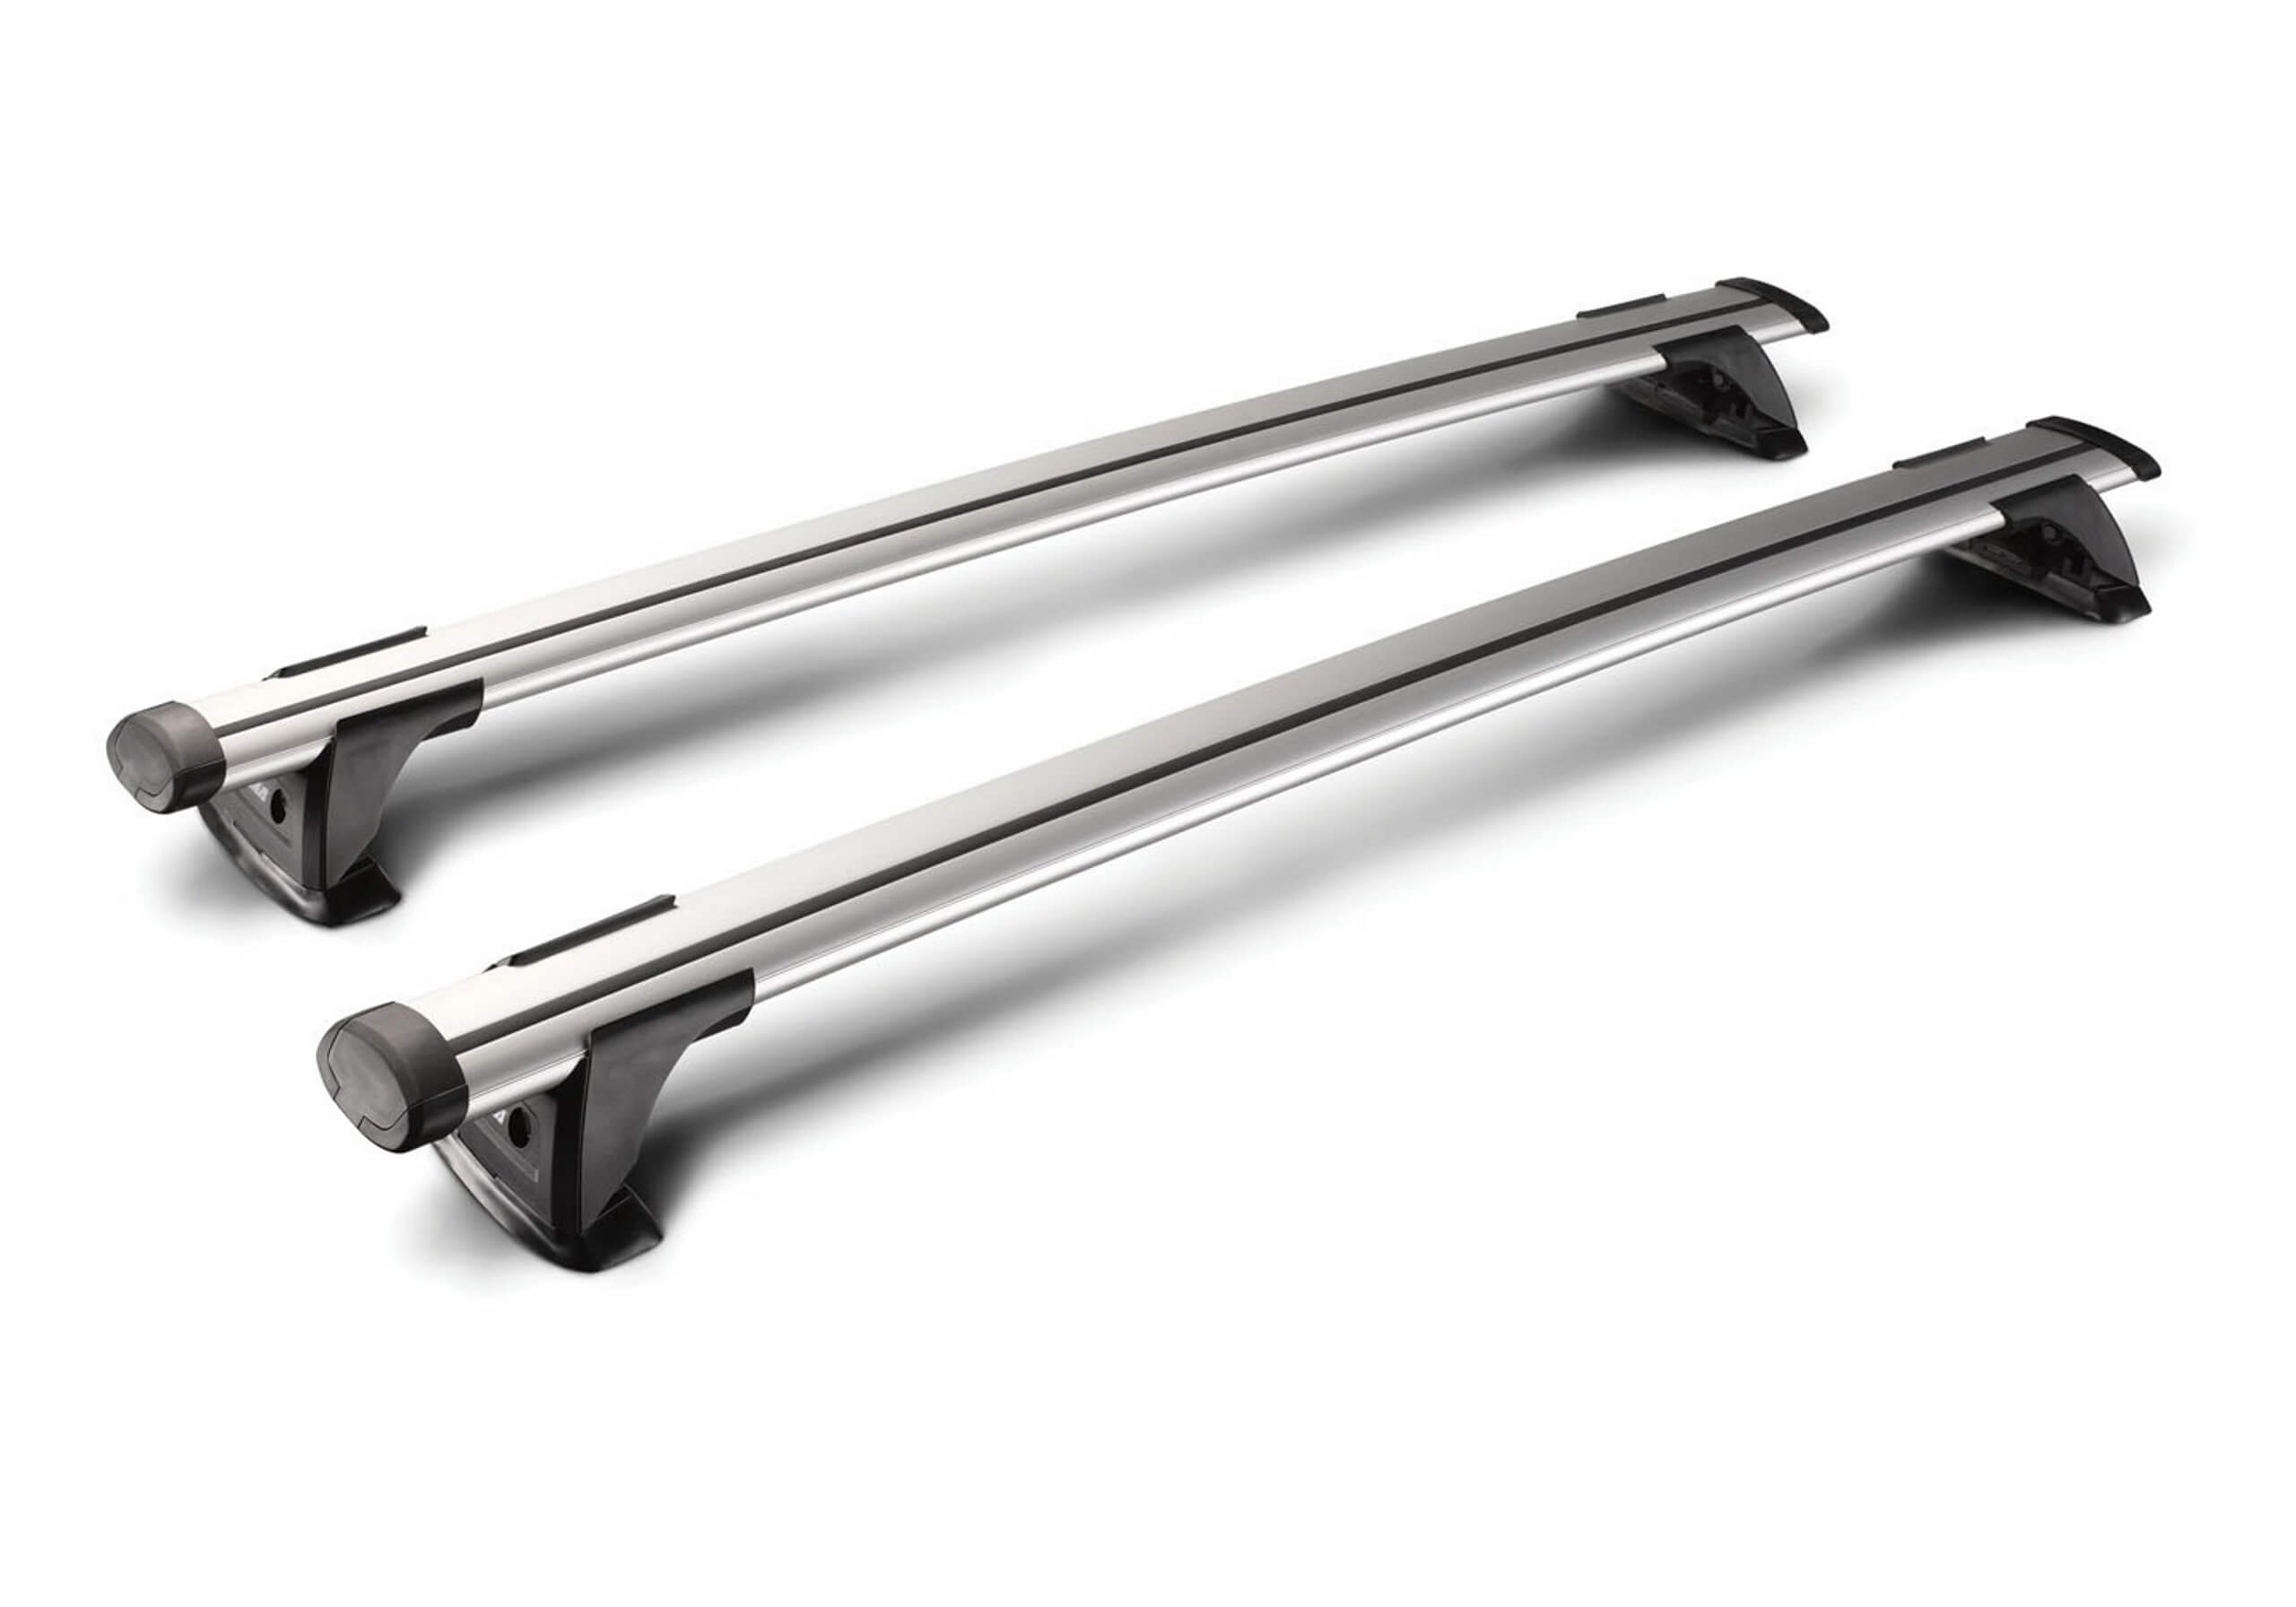 Nissan Patrol GR (1998 to 2005):Yakima roof bars package - S17 silver bars with K324 kit